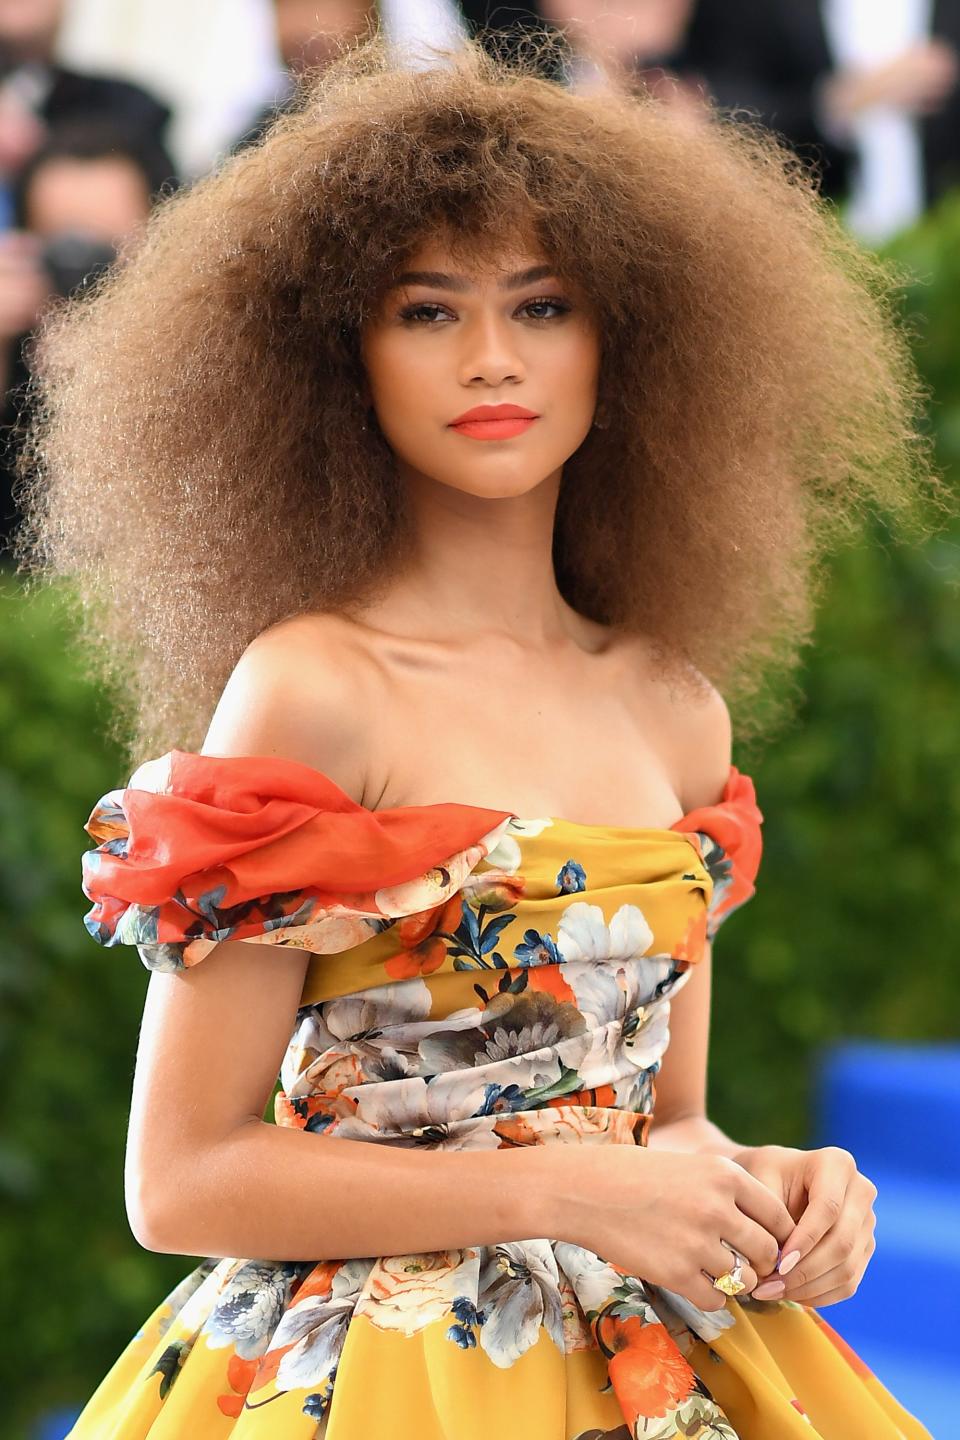 Zendaya in a floral off-the-shoulder gown posing at an event